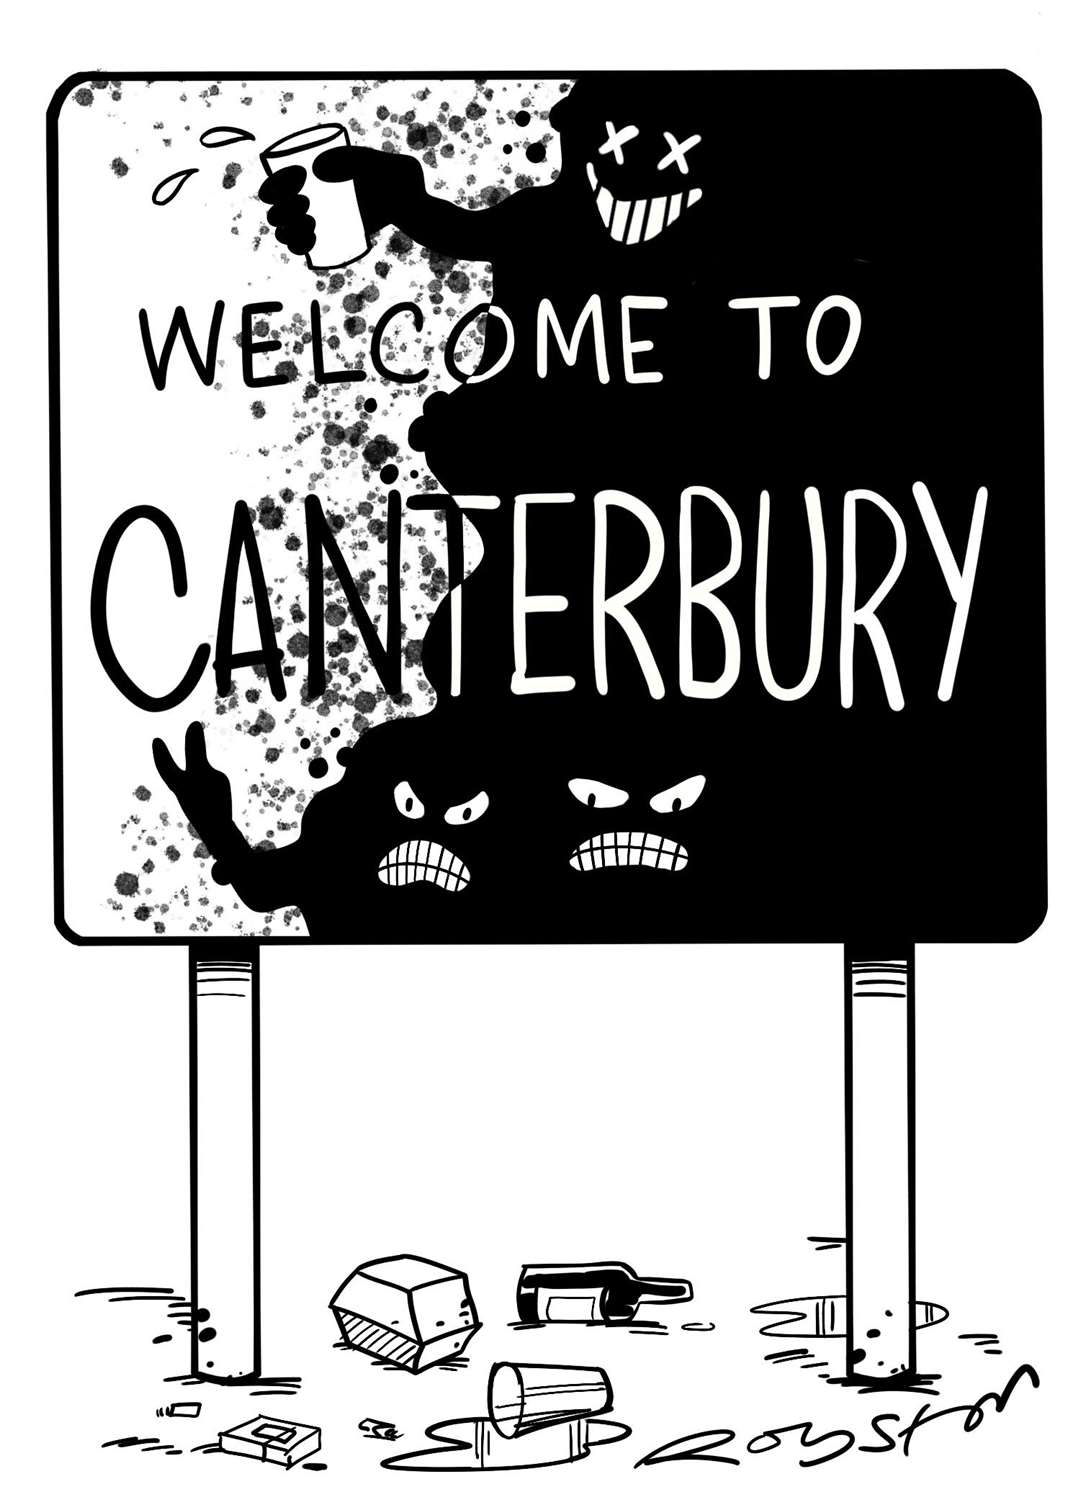 Canterbury has been branded 'sleazy'